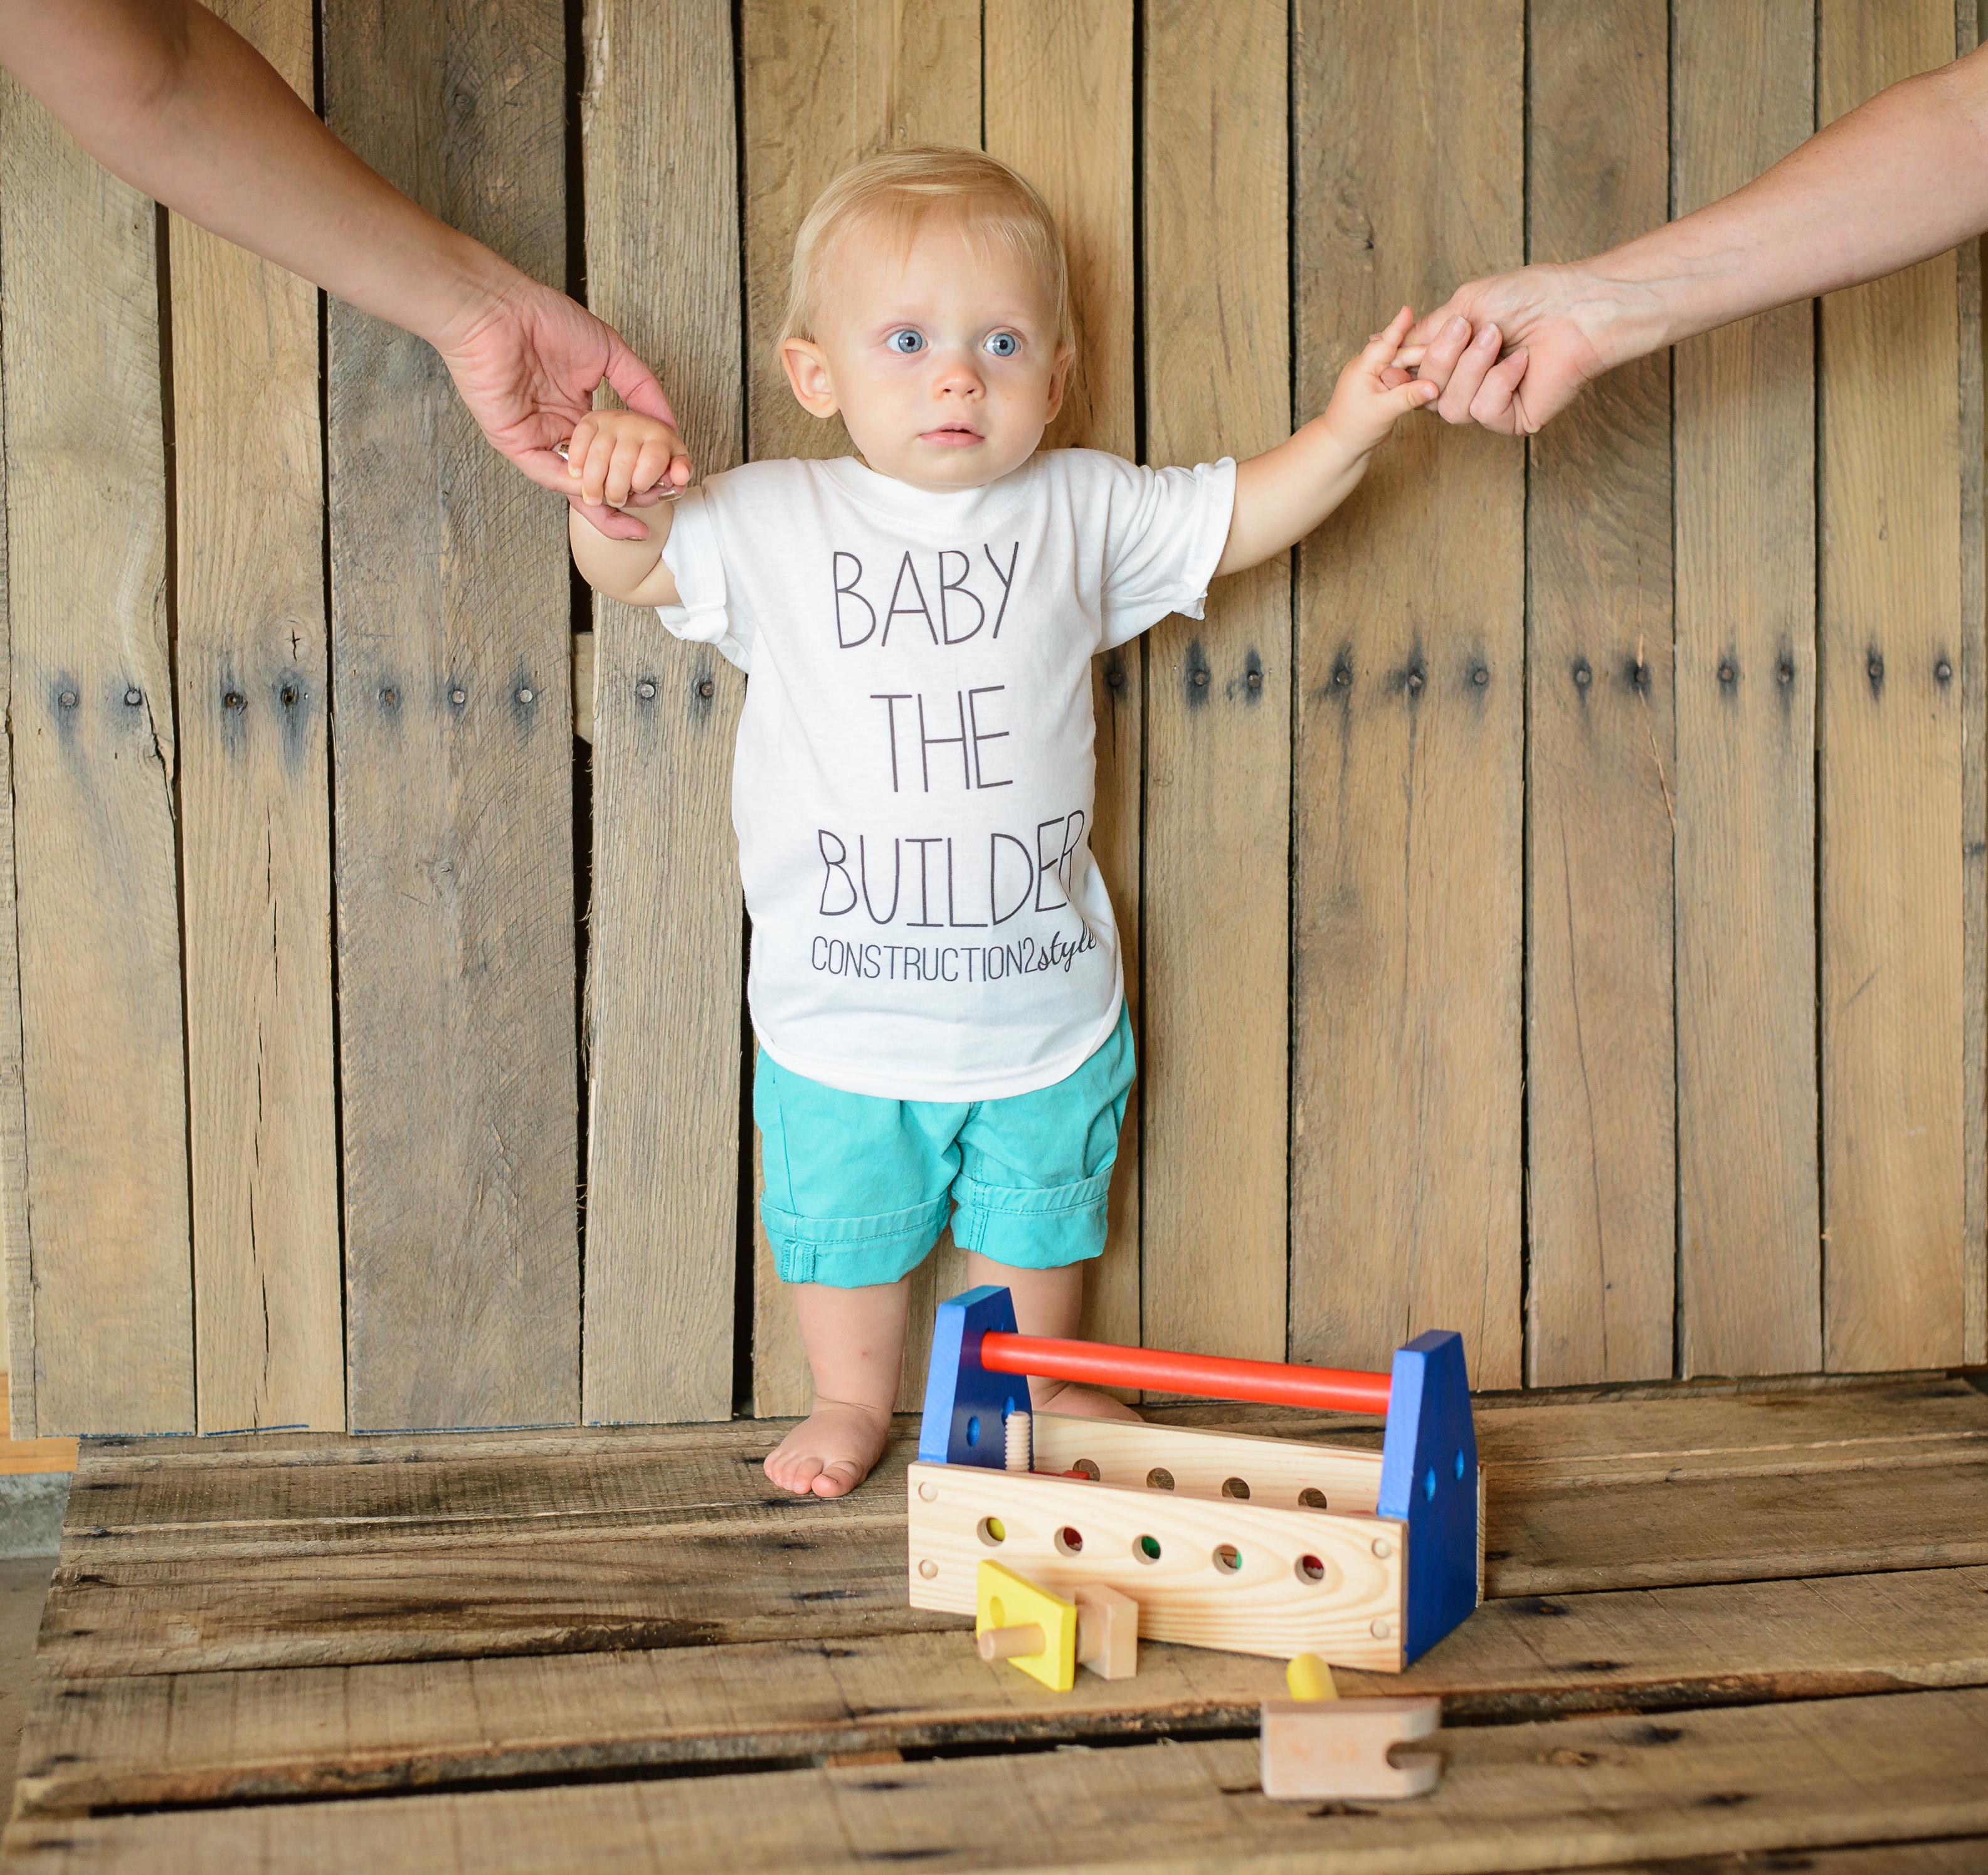 DIY Pallet Back Drop for PhotoshootBaby the Builder | construction2style